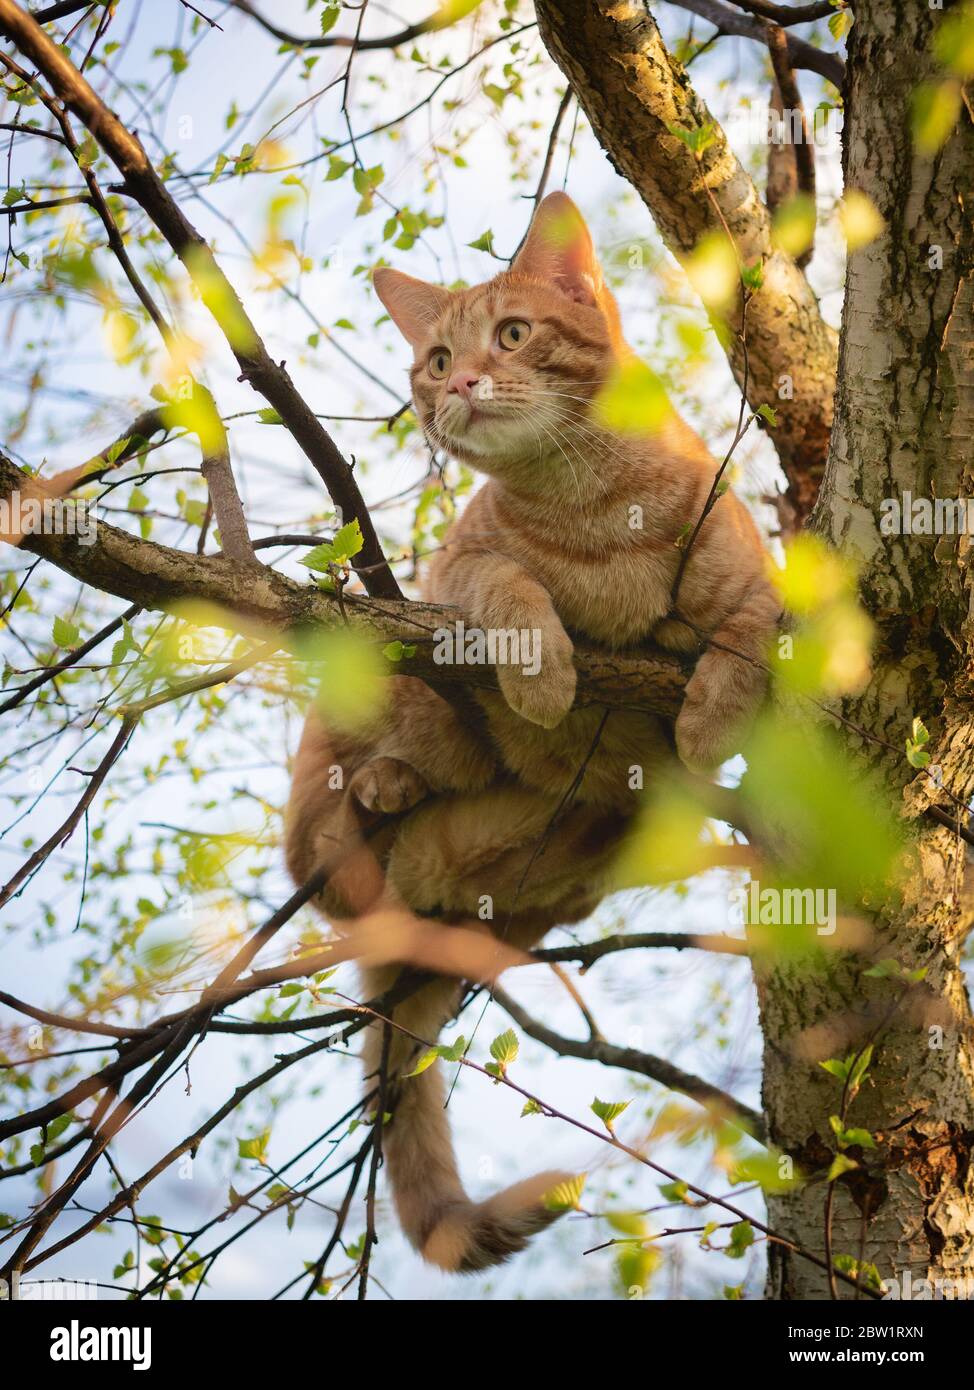 Red cat sitting on a tree with young spring foliage, close-up Stock Photo